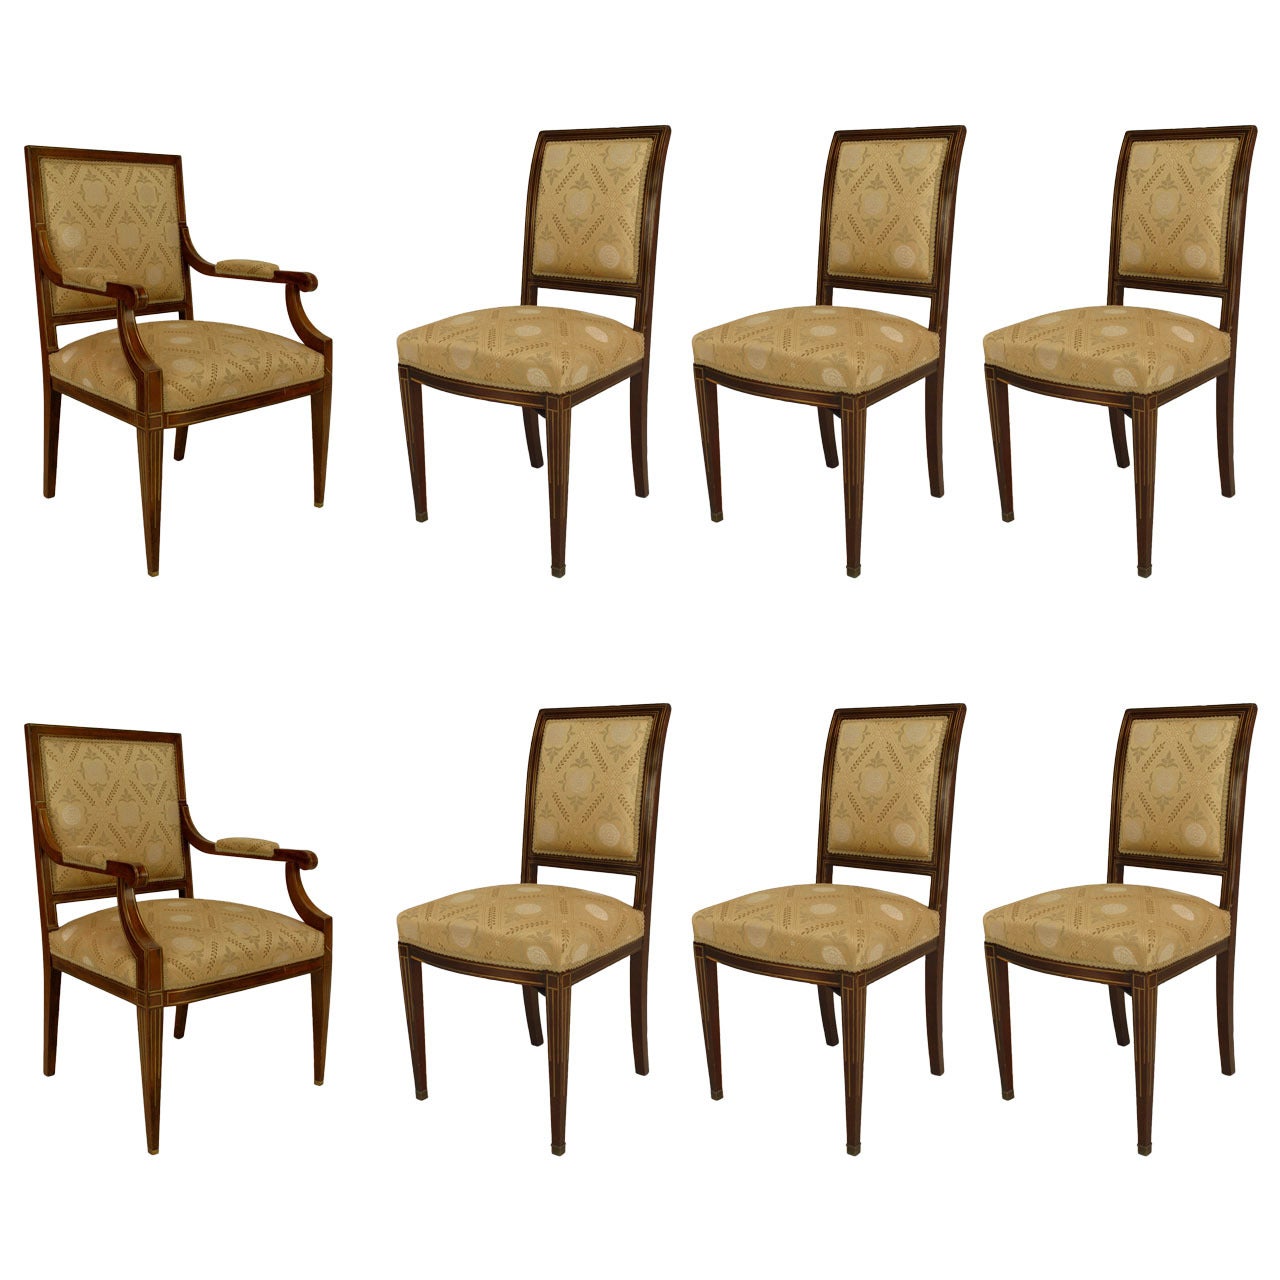 Set of 8 Continental Baltic Set of 8 Mahogany Chairs For Sale